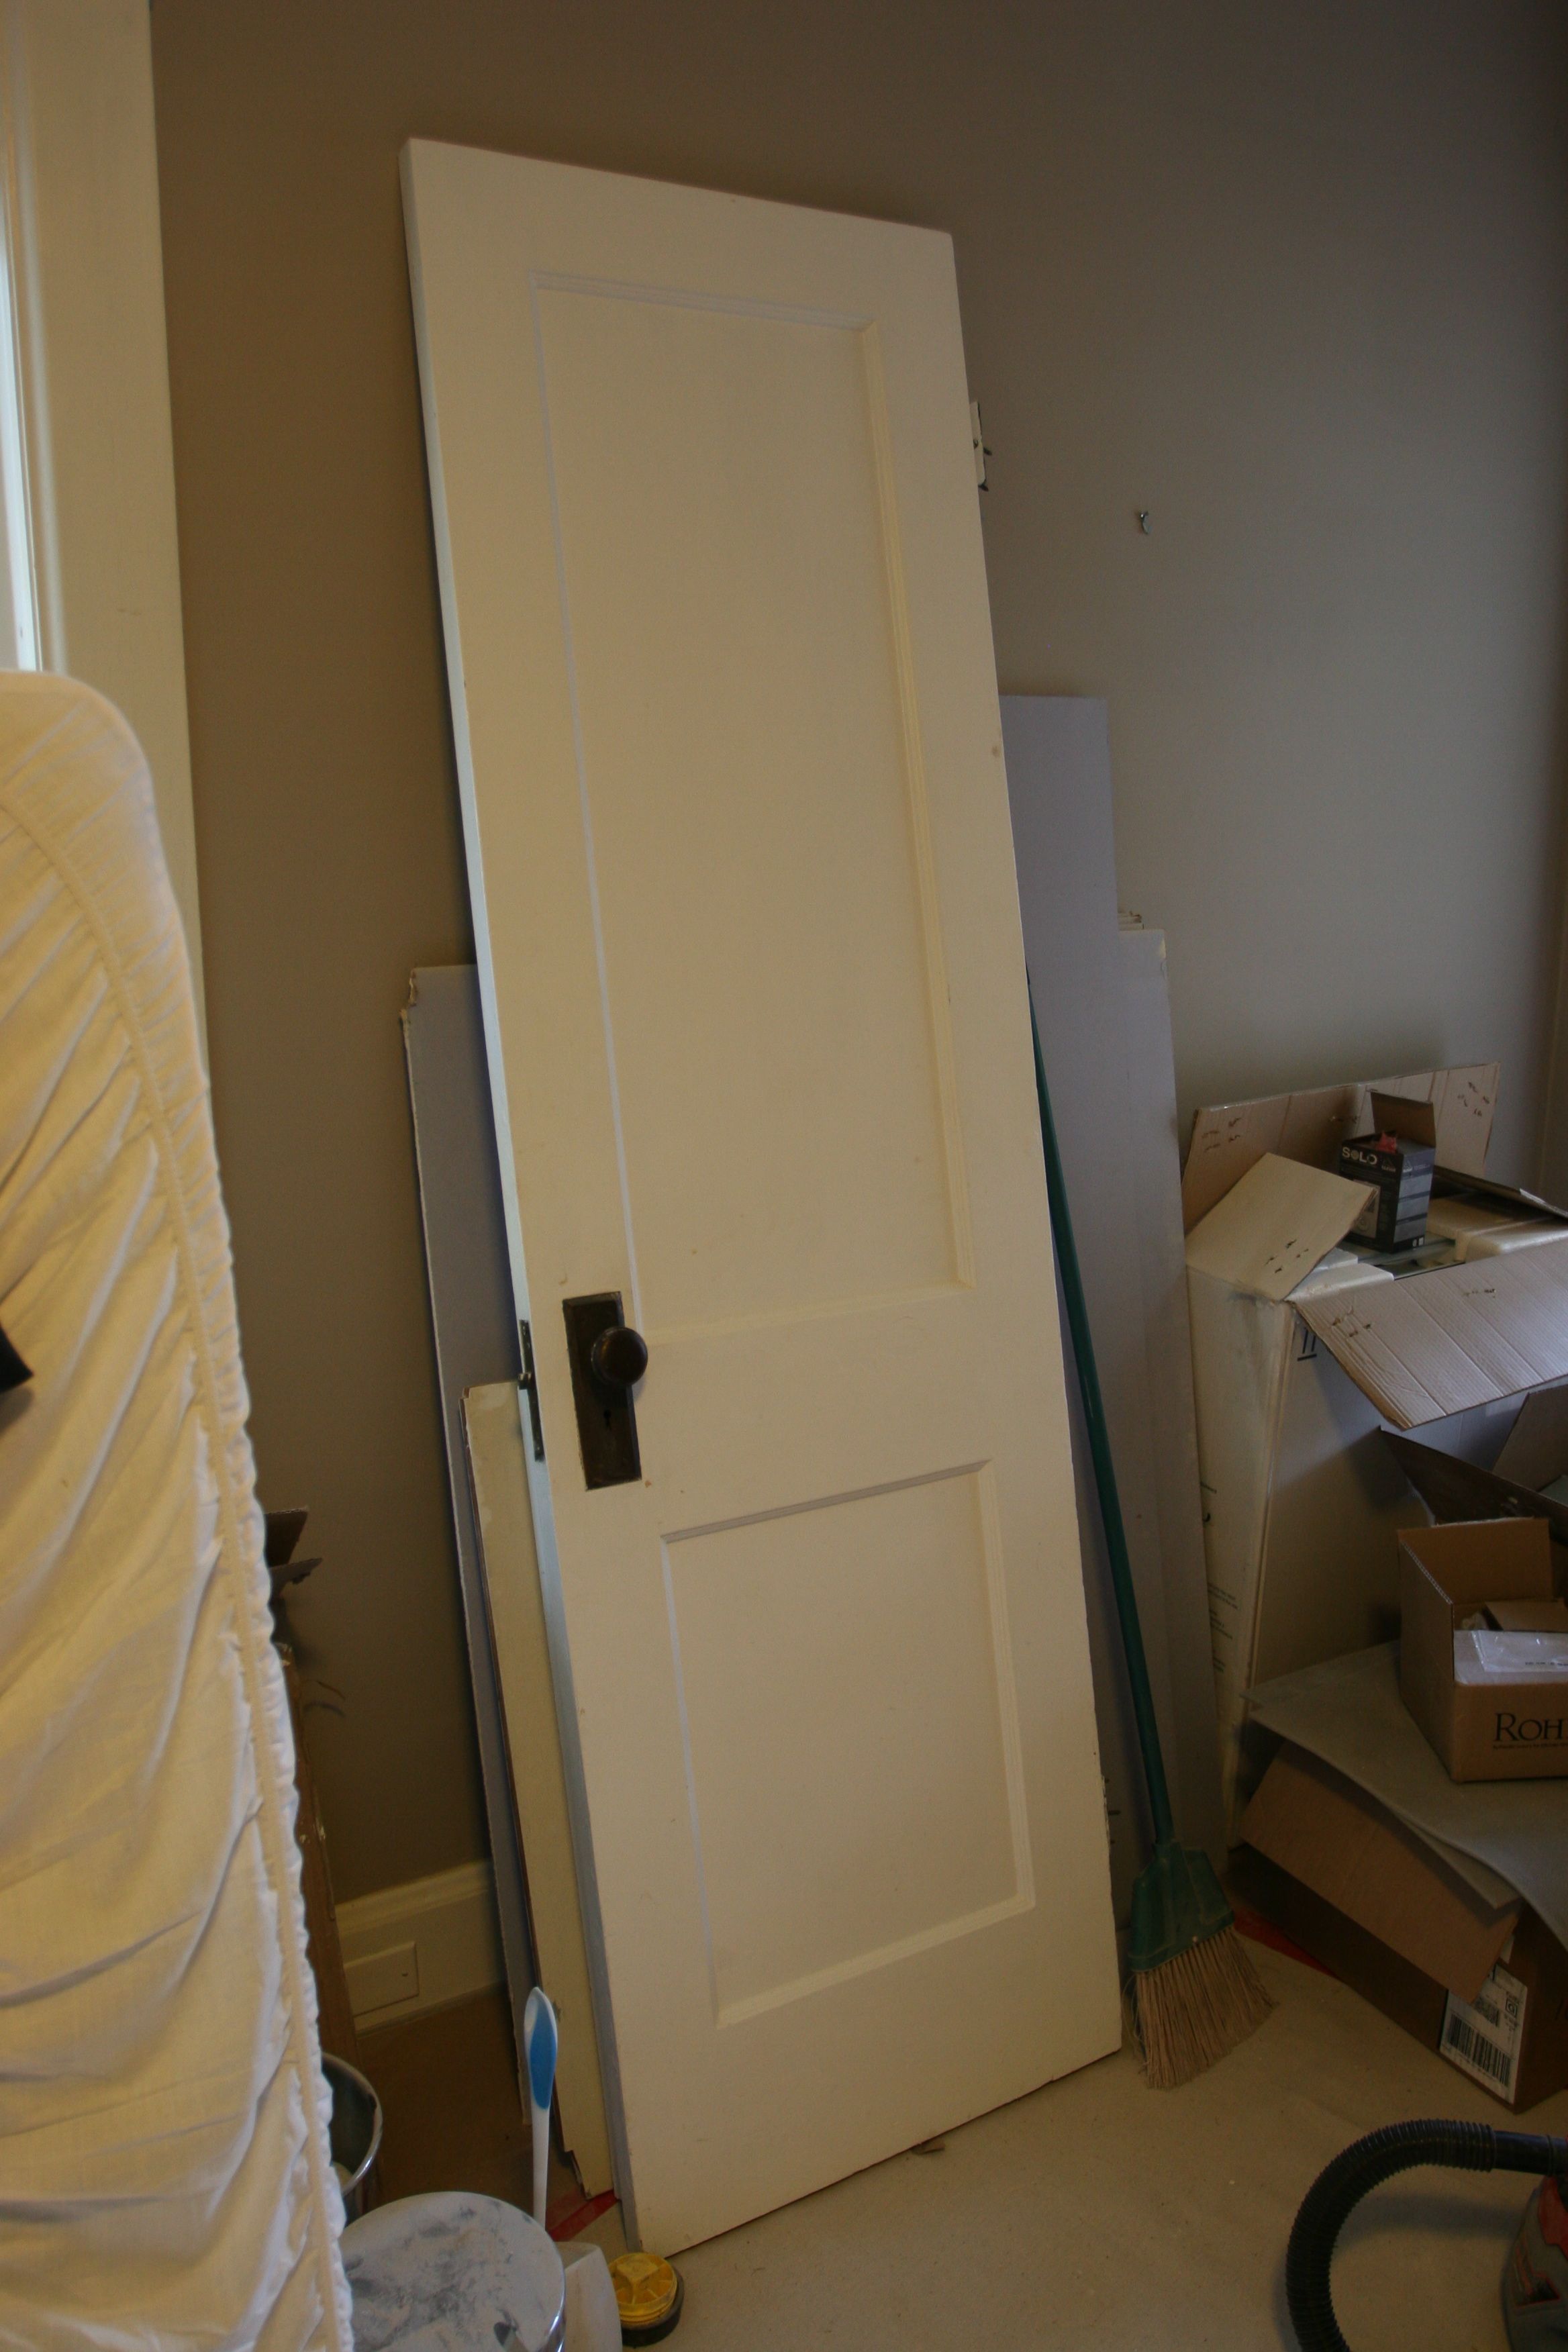 This is the door we removed from the bathroom. I think we'll save it for a future closet renovation (if we get to it).